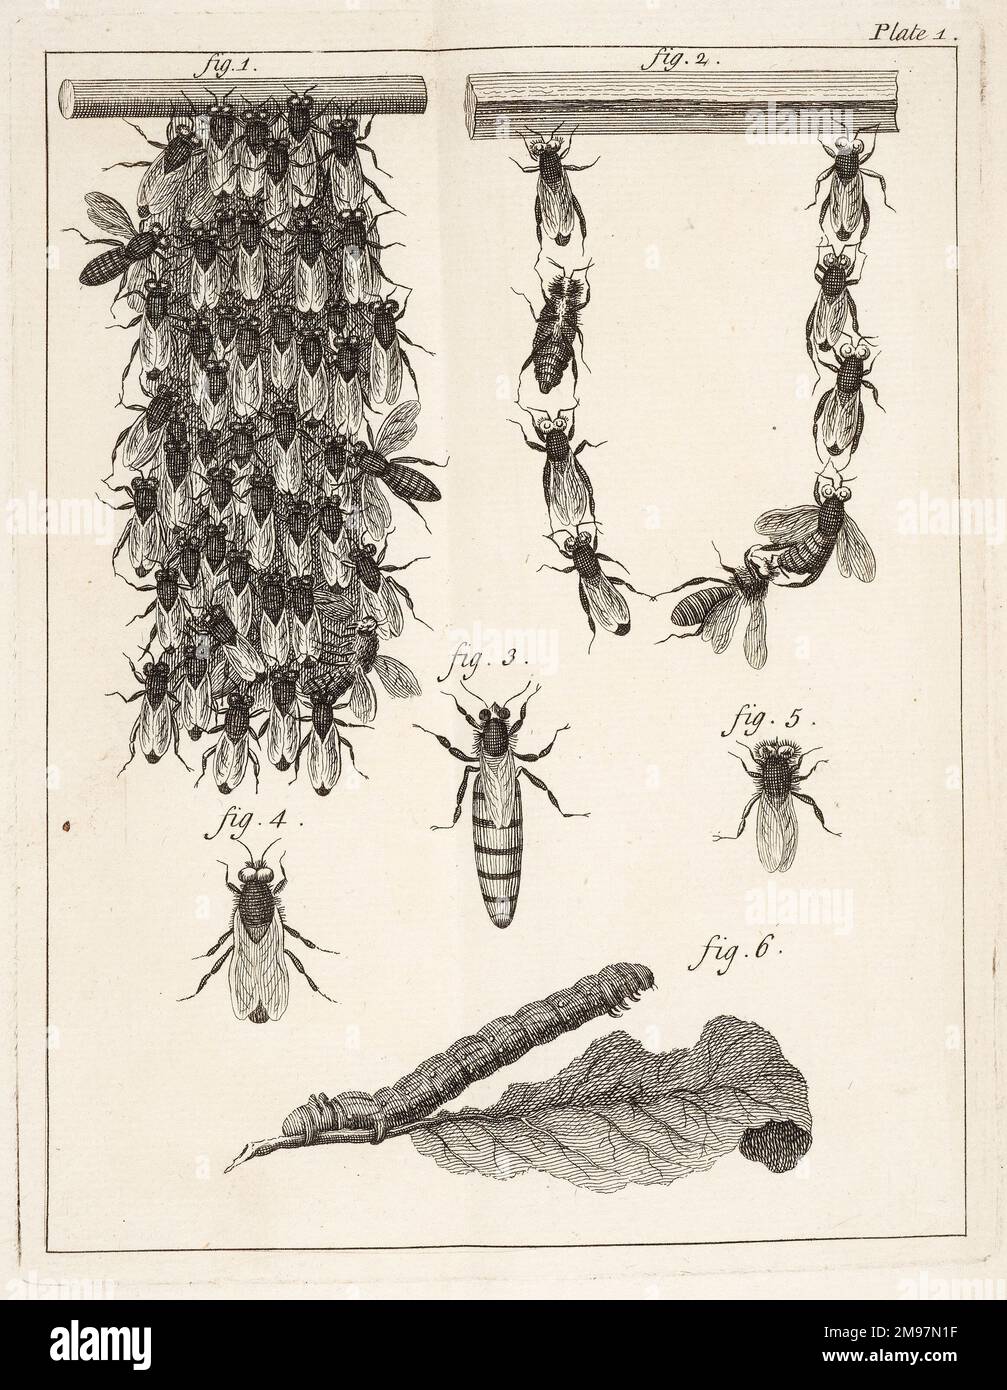 Beehives, queen bees, and worker bees. Illustration from Gilles August Bazin, The natural history of bees. Stock Photo